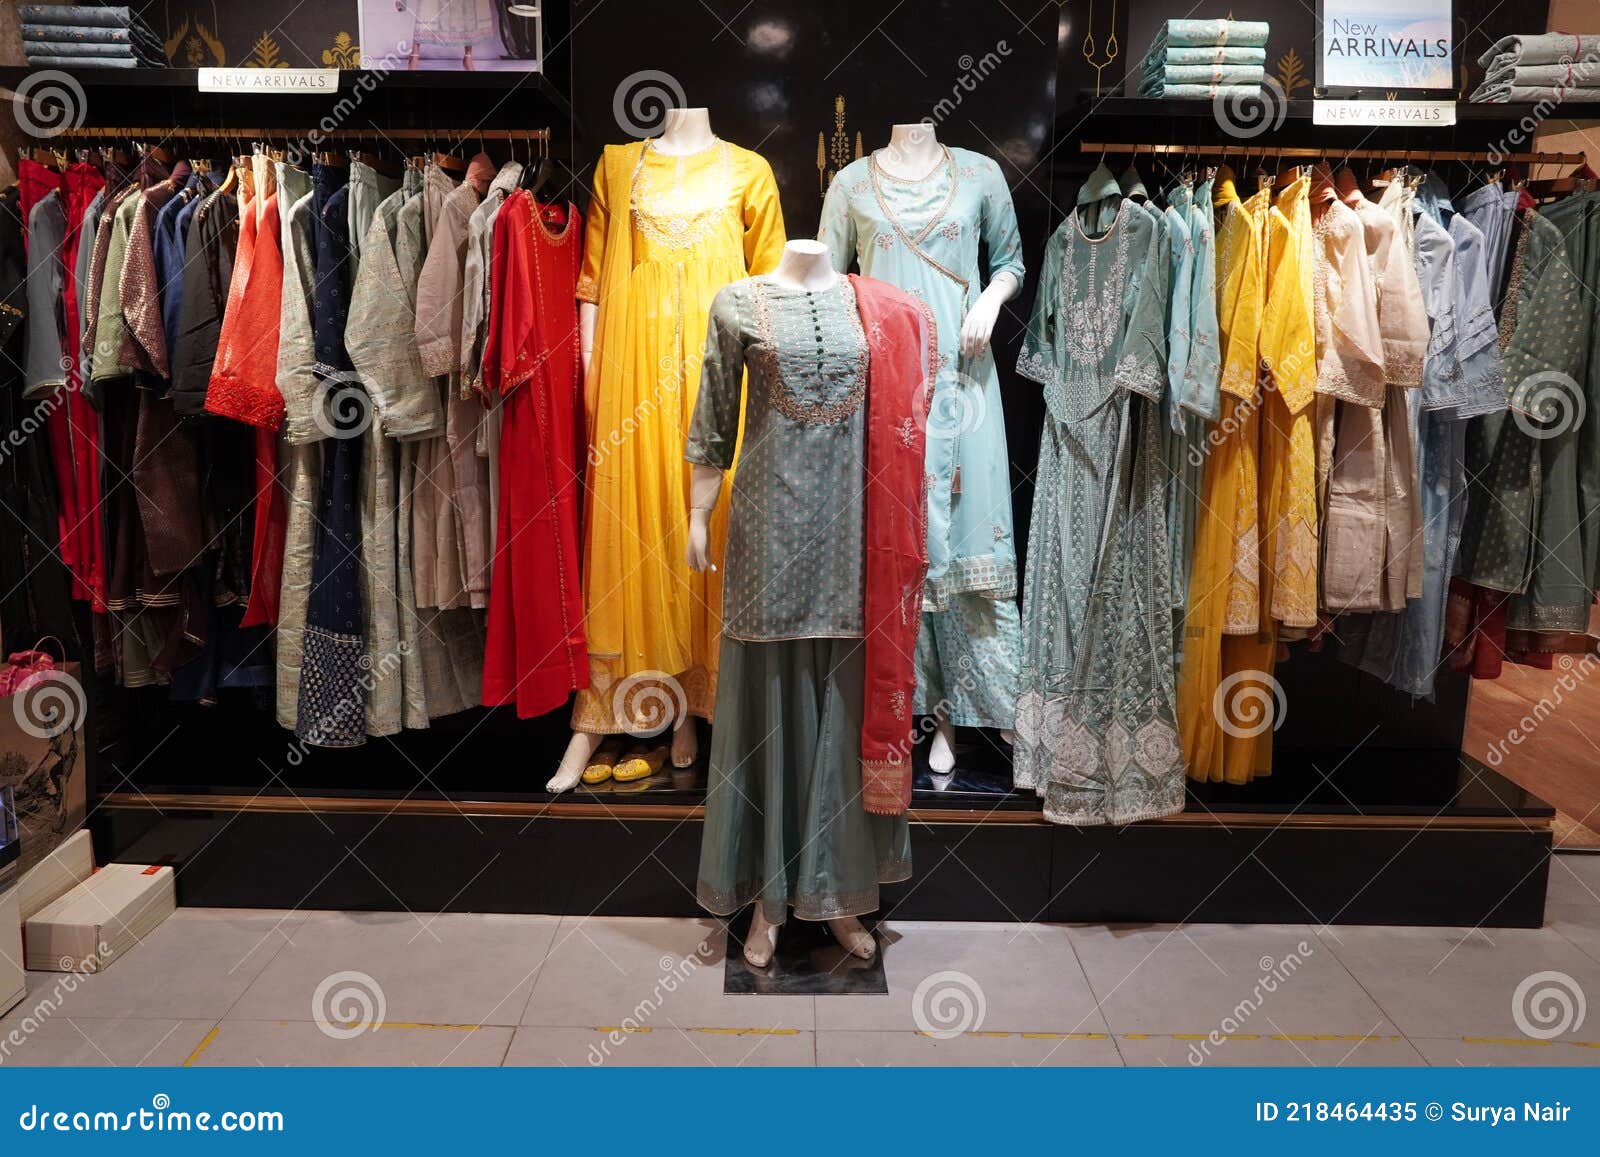 An overview of the women's wear market in India - India Retailing